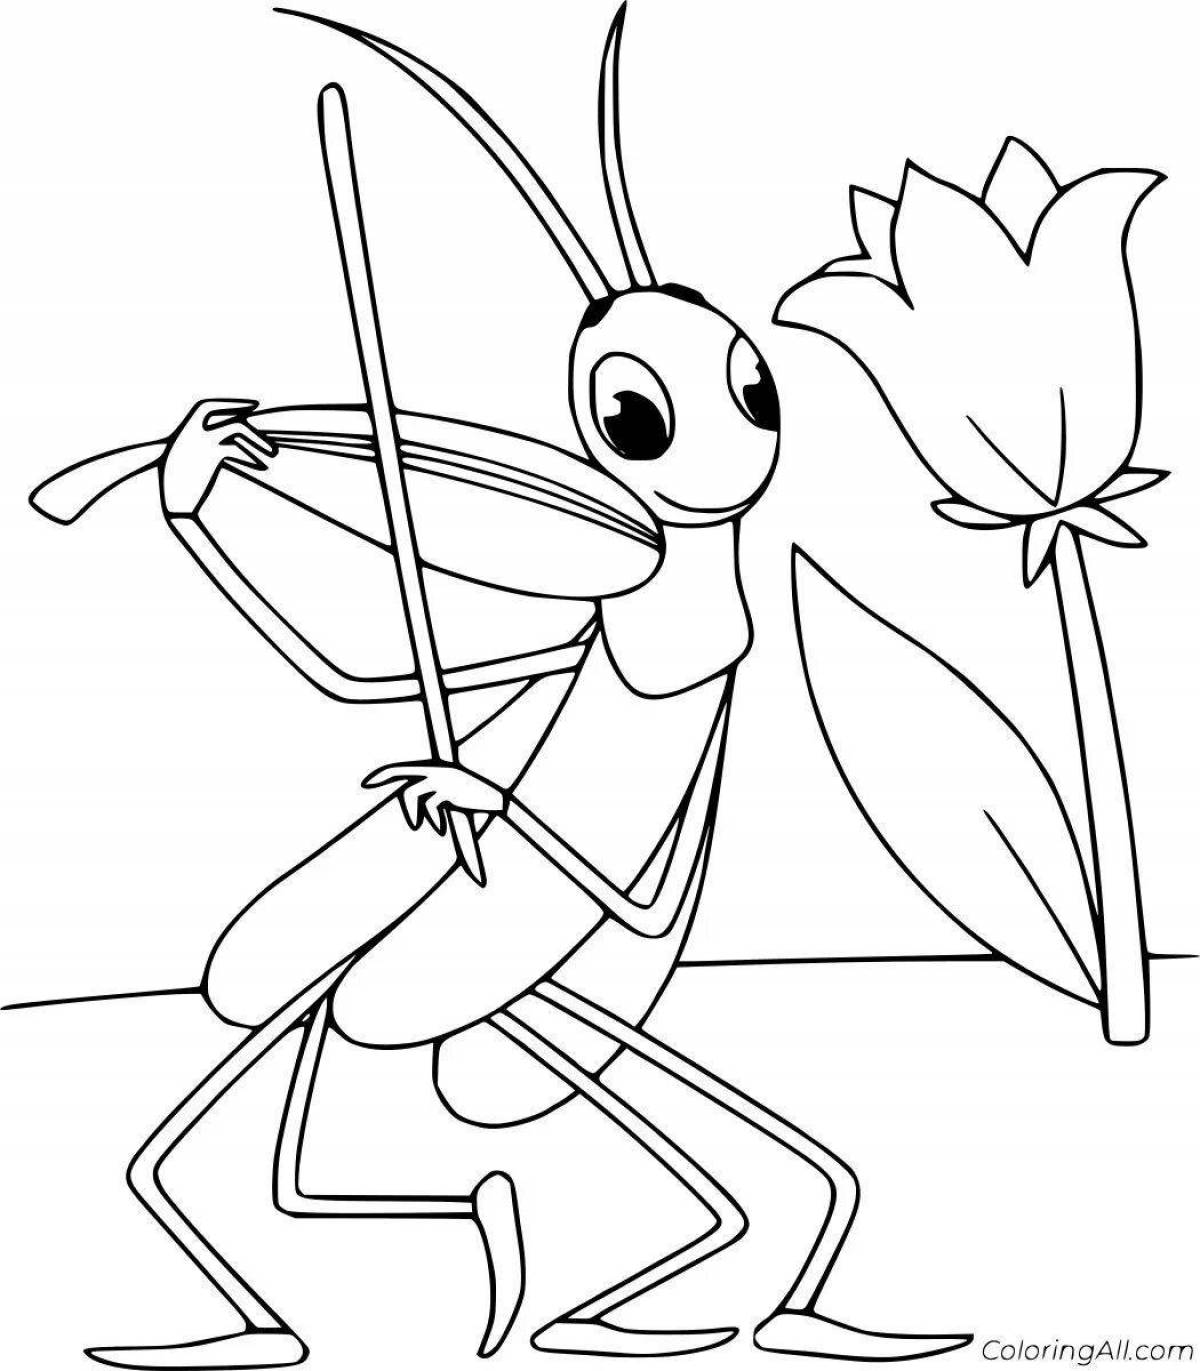 Entertaining cricket coloring page